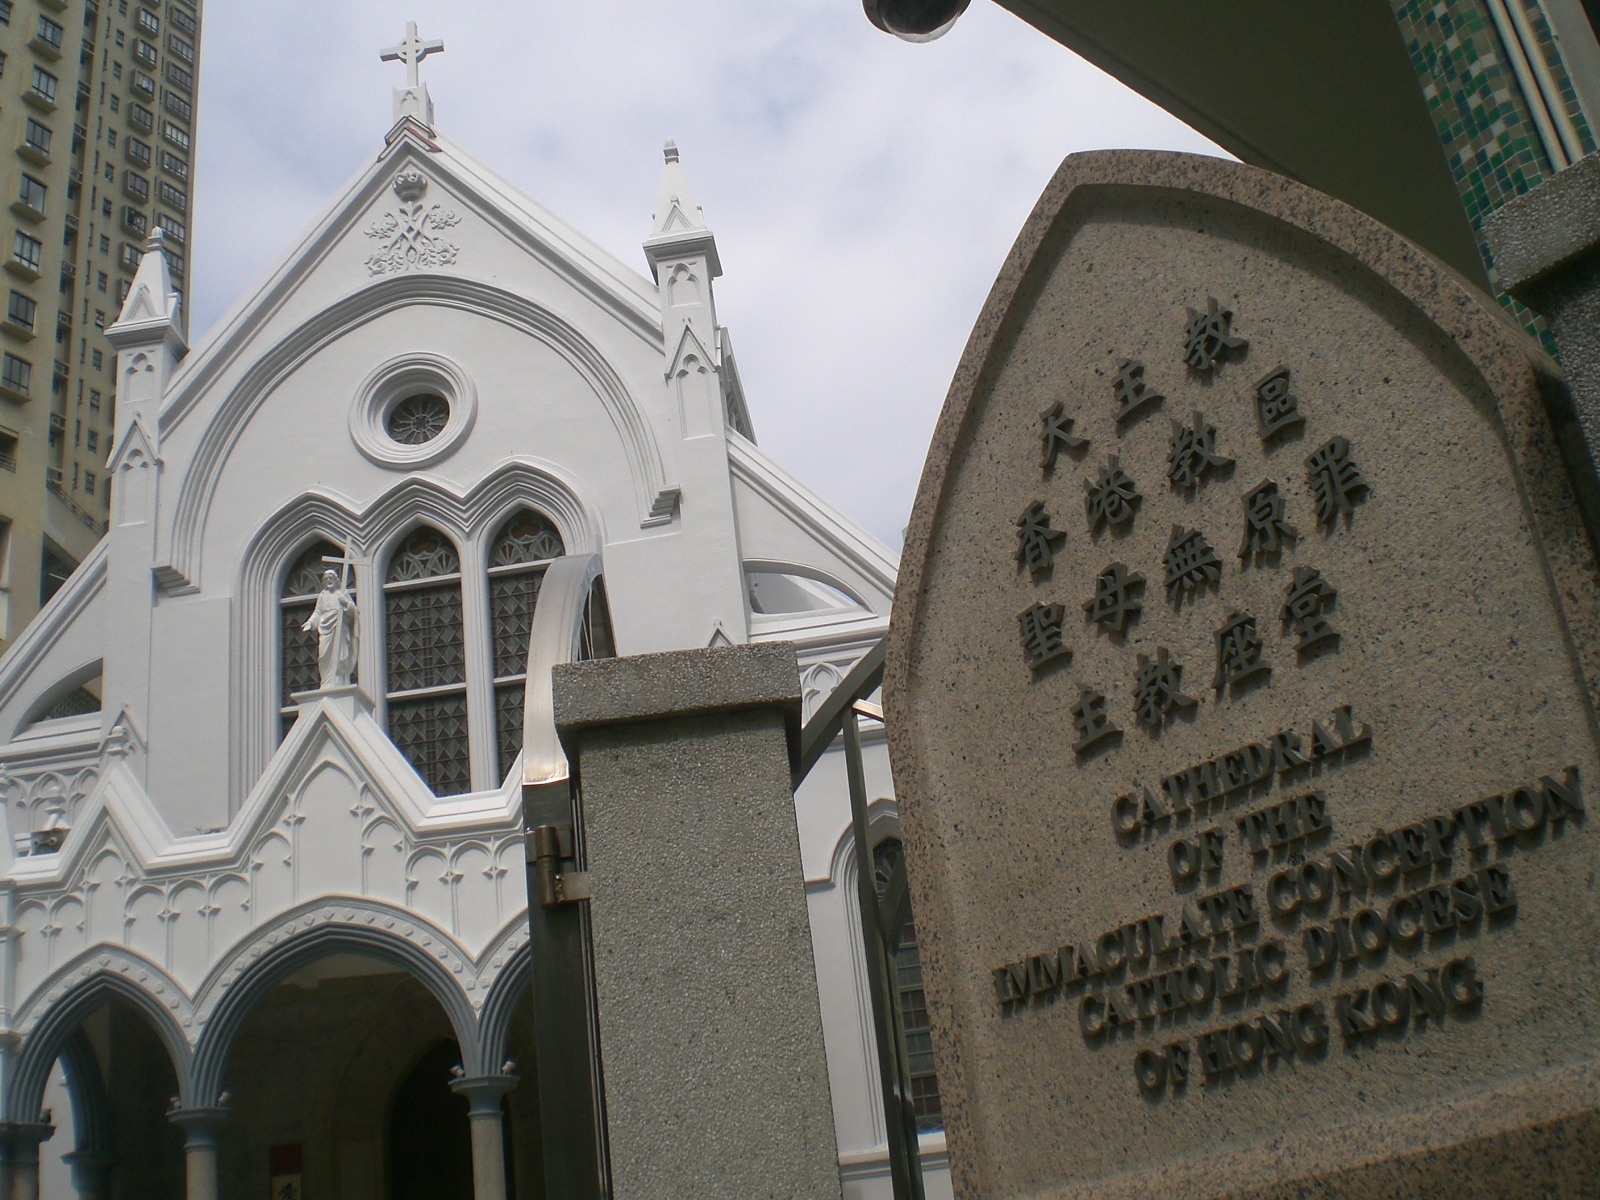 Hong Kong’s Cathedral of the Immaculate Conception is seen in this 2008 photograph. Jackie Cheu/ via Wikimedia Commons